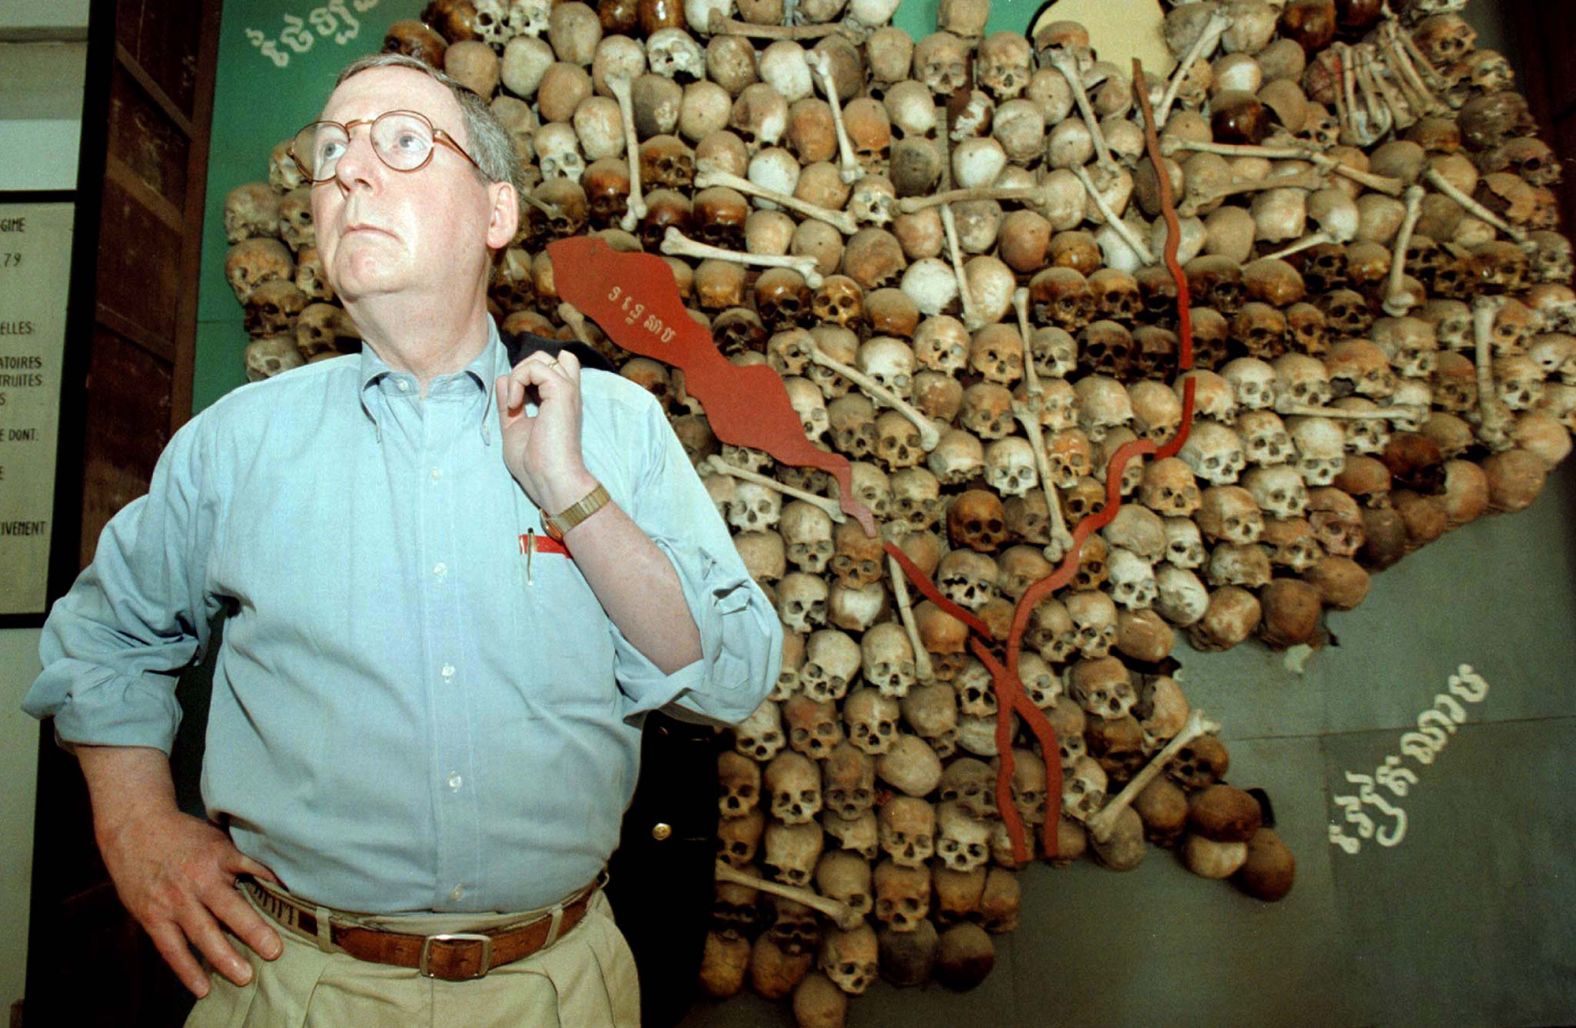 McConnell stands near a map of Cambodia made with the skulls of Khmer Rouge victims during his visit to the Tuol Sleng Genocide Museum in Phnom Penh, Cambodia, in March 1999. McConnell had met with Cambodian Prime Minister Hun Sen and said that US aid would be at risk if a trial of Khmer Rouge leaders did not measure up to international standards.